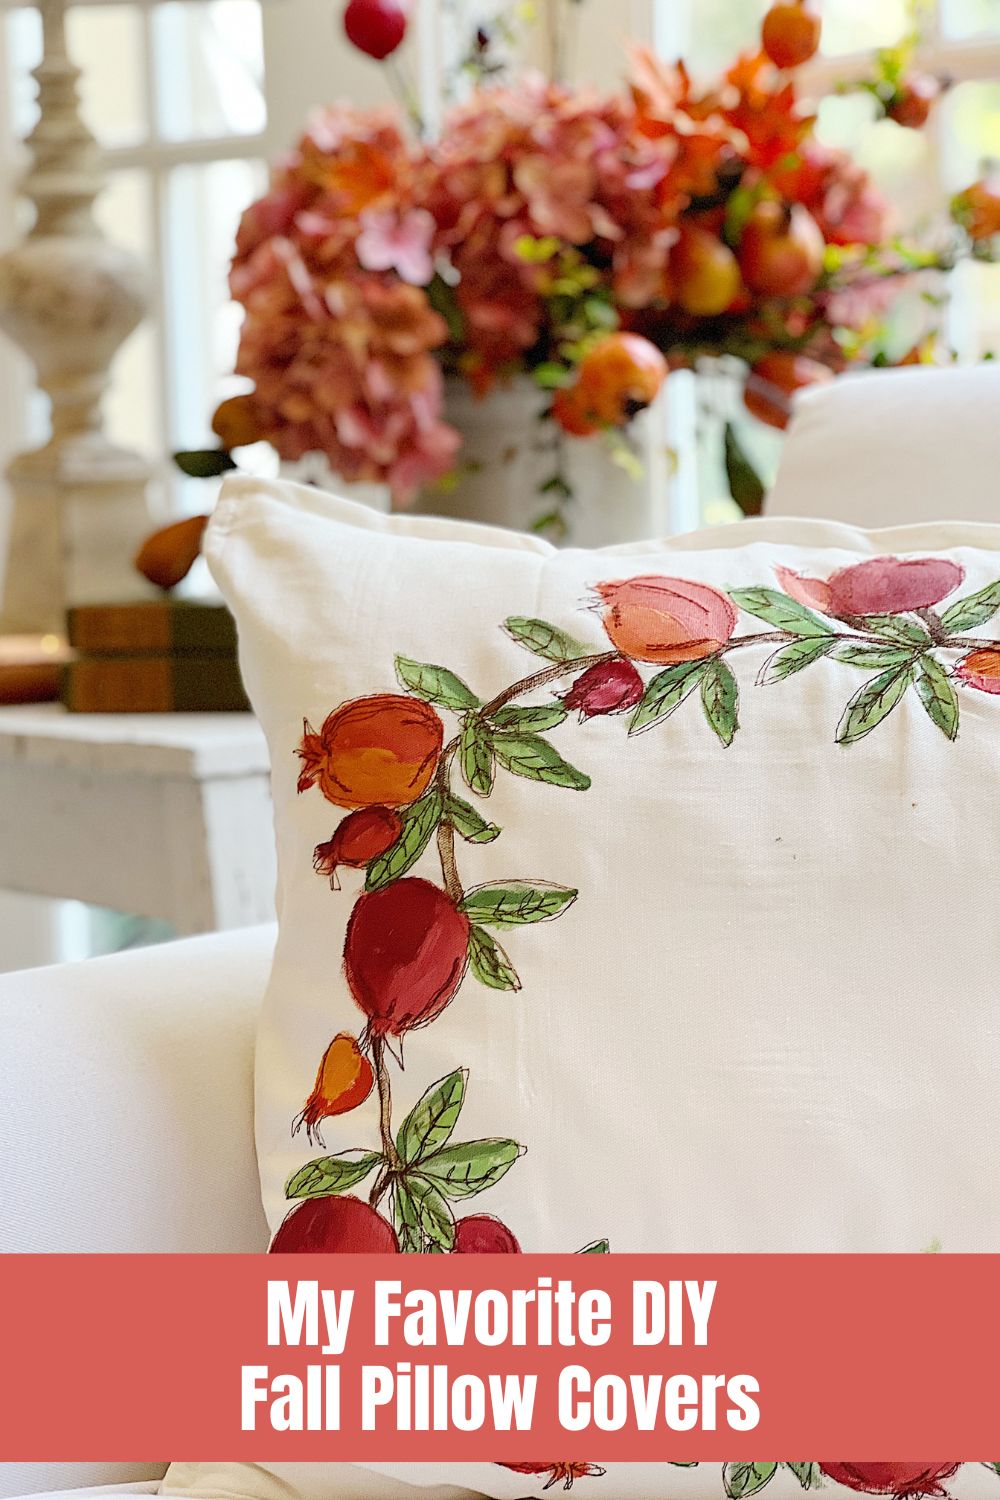 It is officially the end of summer, so let's decorate for fall! Fall pillow covers are an easy way to shift the seasons.